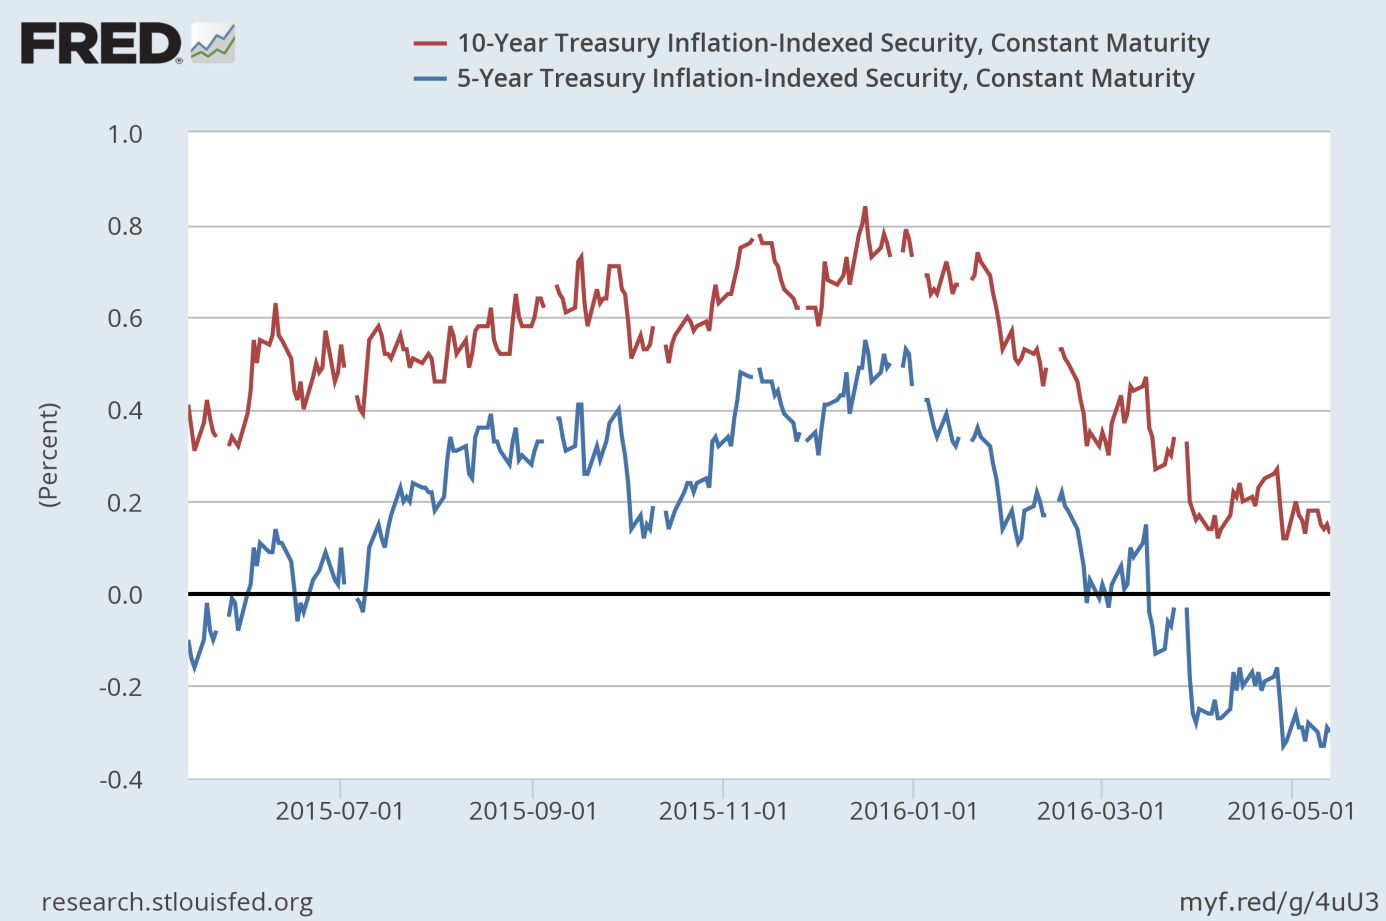 The 10-year Inflation-Indexed Treasury rate and the 5-year Inflation-Indexed Treasury rate